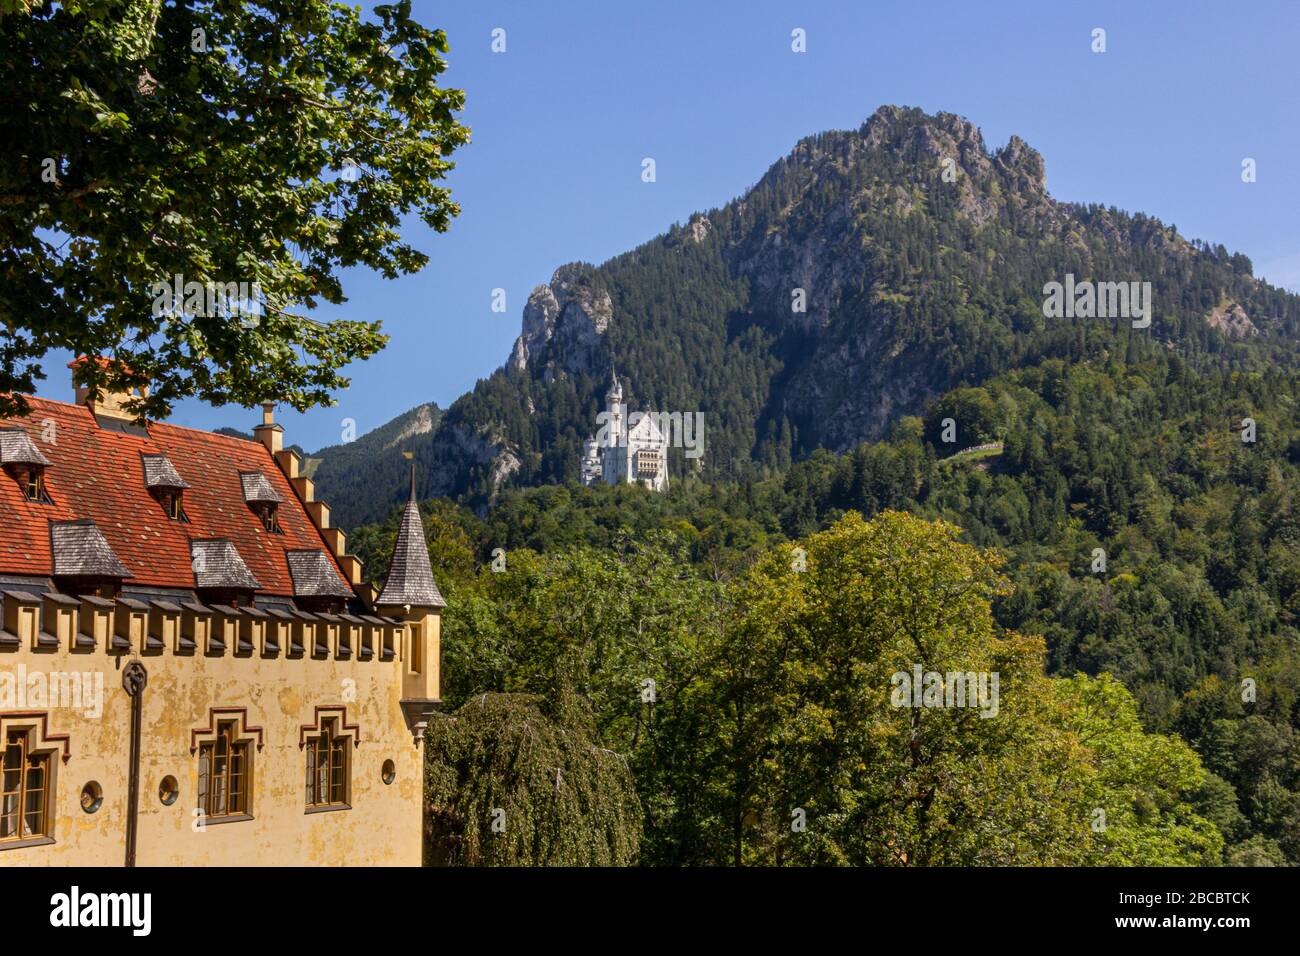 Beautiful view of world-famous Neuschwanstein Castle, the nineteenth-century Romanesque Revival palace built for King Ludwig II on a rugged cliff near Stock Photo